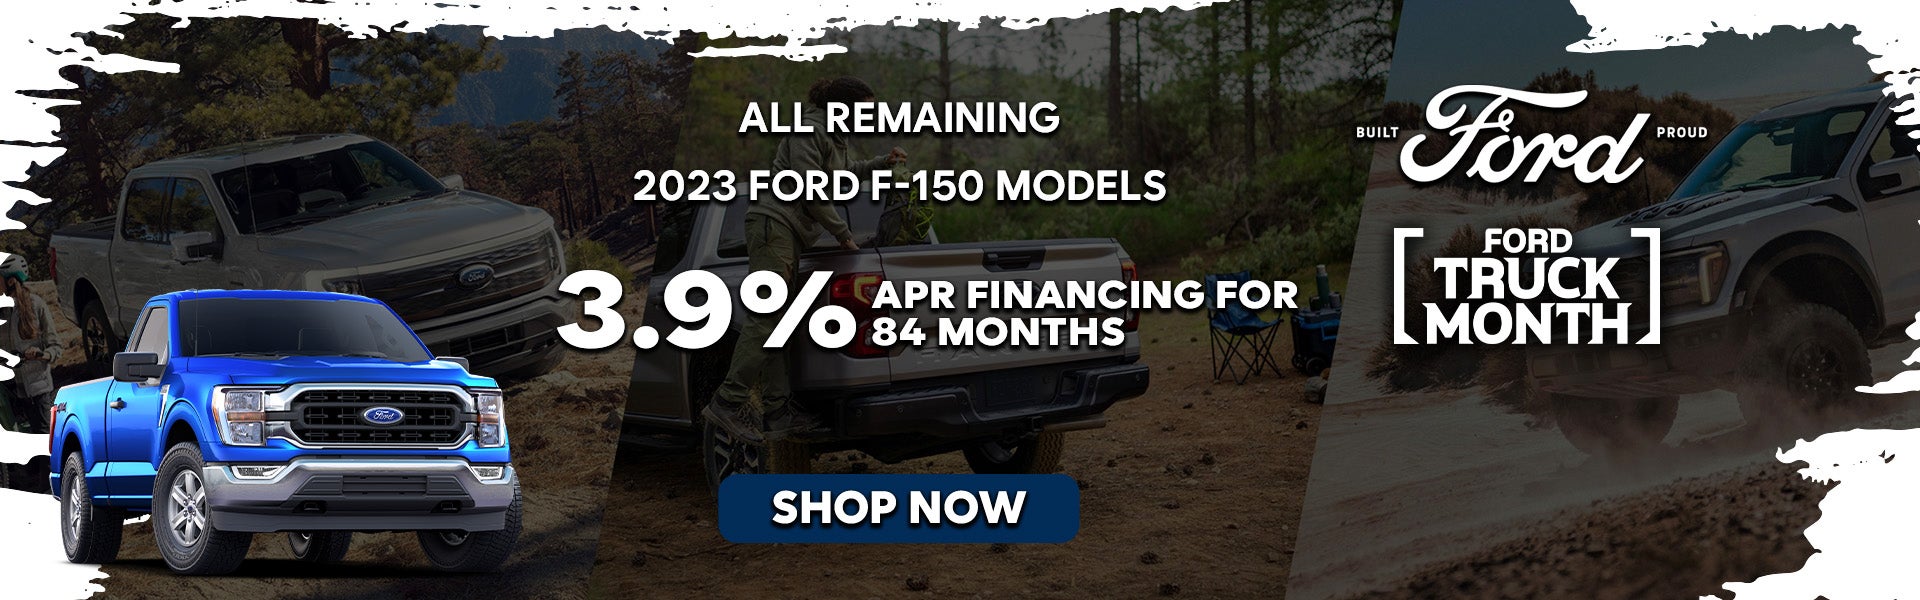 Save on New 2023 Ford F-150 Models